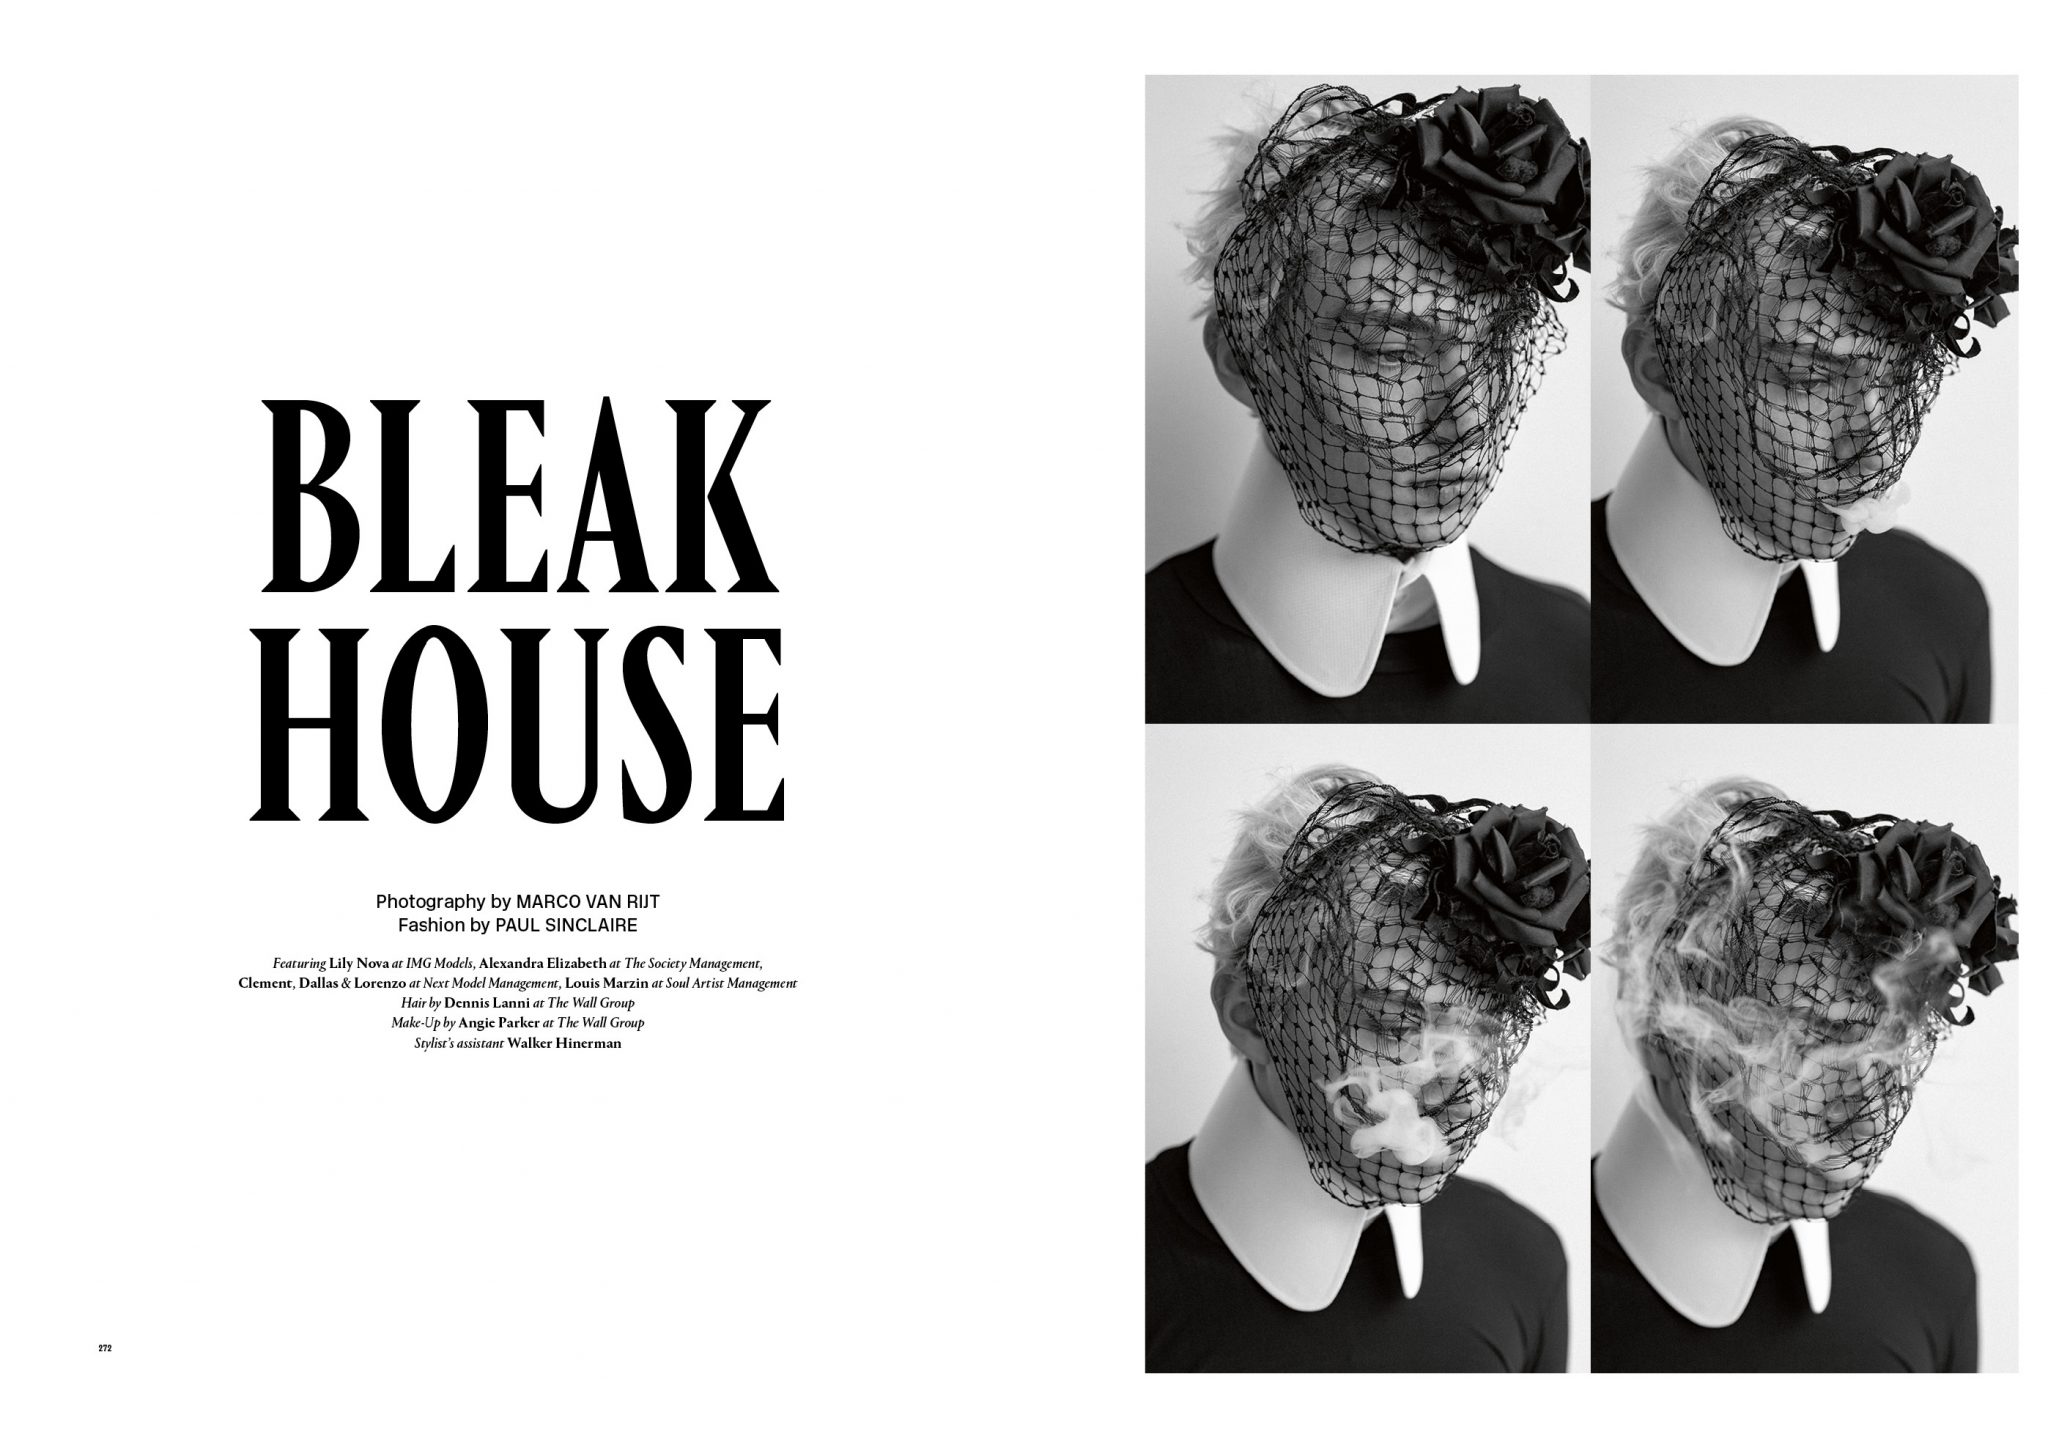 Paul Sinclaire | Behind the Blinds: Breakhouse | 1